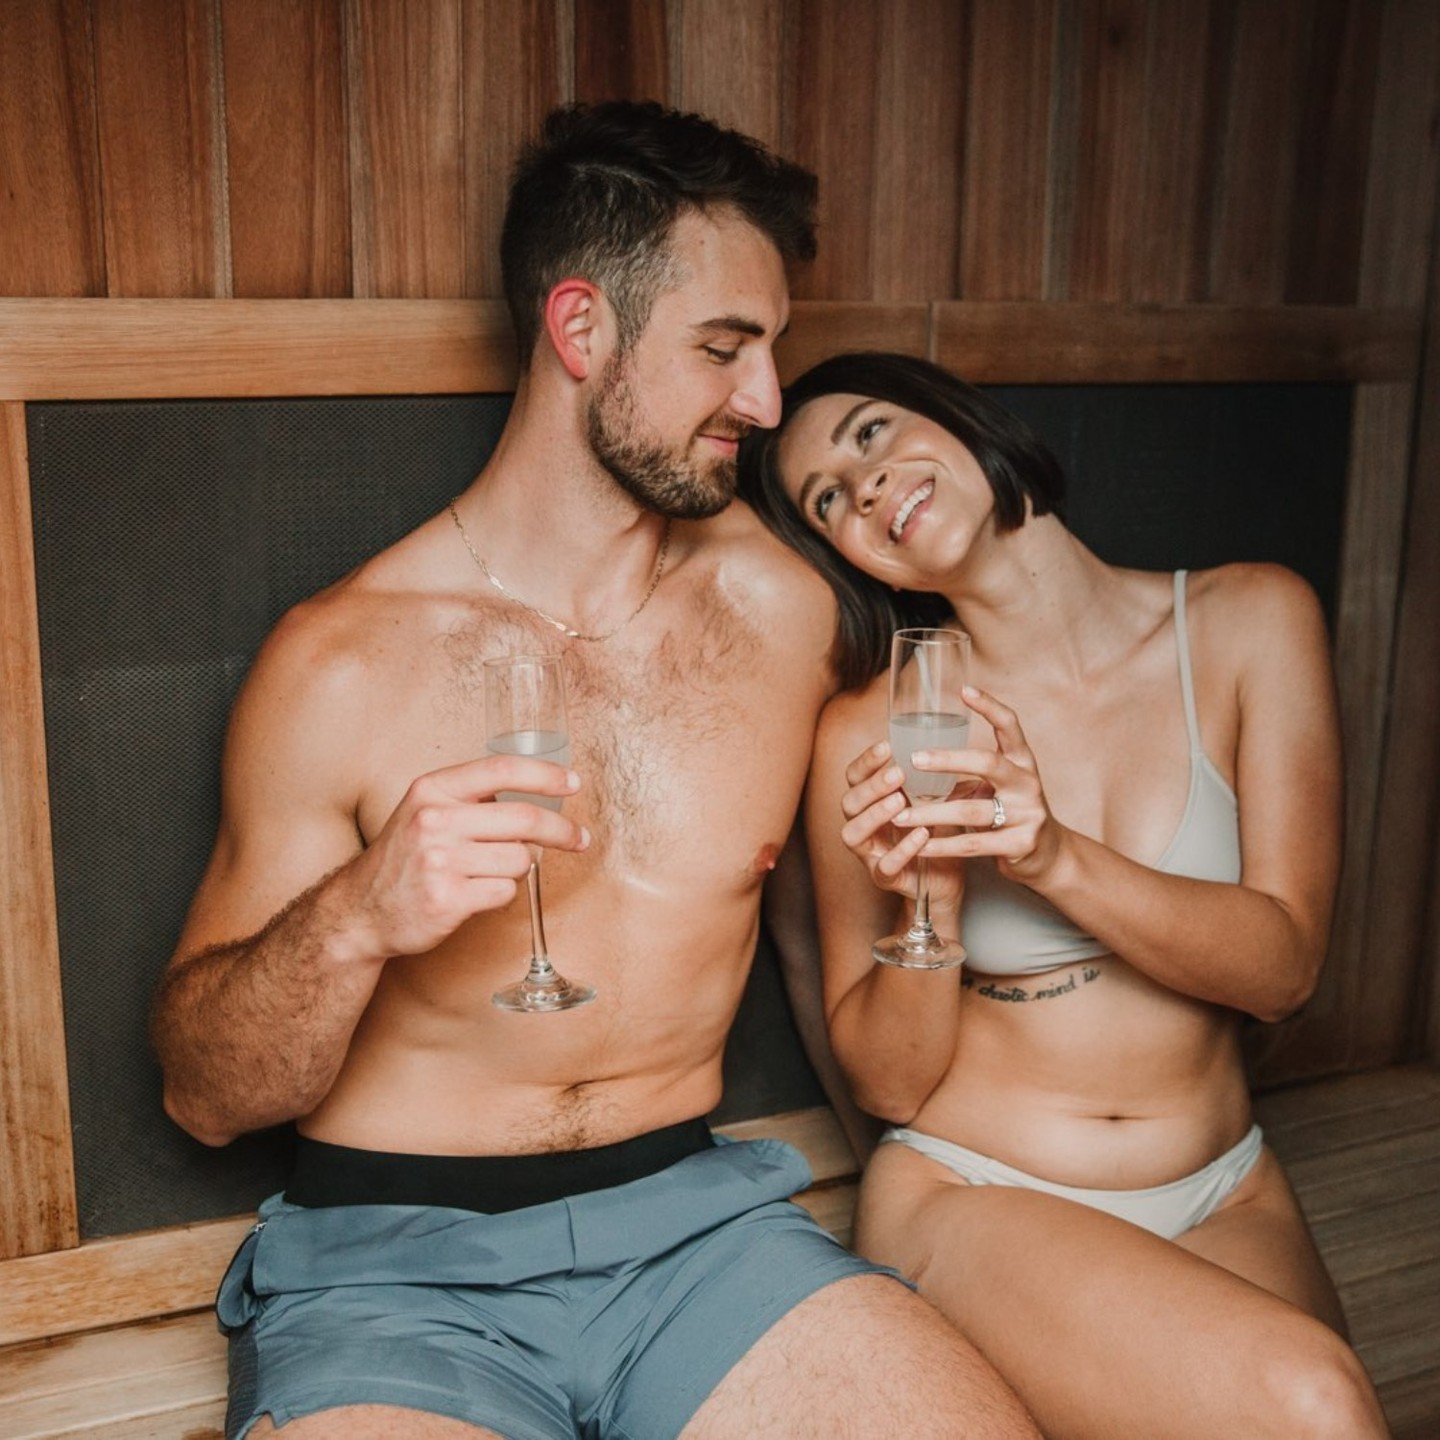 Escape the midday hustle + spend quality time with your loved one with a Weekday Happy Hour Deluxe Sauna 💖

Join us weekdays at 12pm + 1pm for an infrared sauna session for 2 for just $45! It's the perfect mid-day escape for a wellness date with you